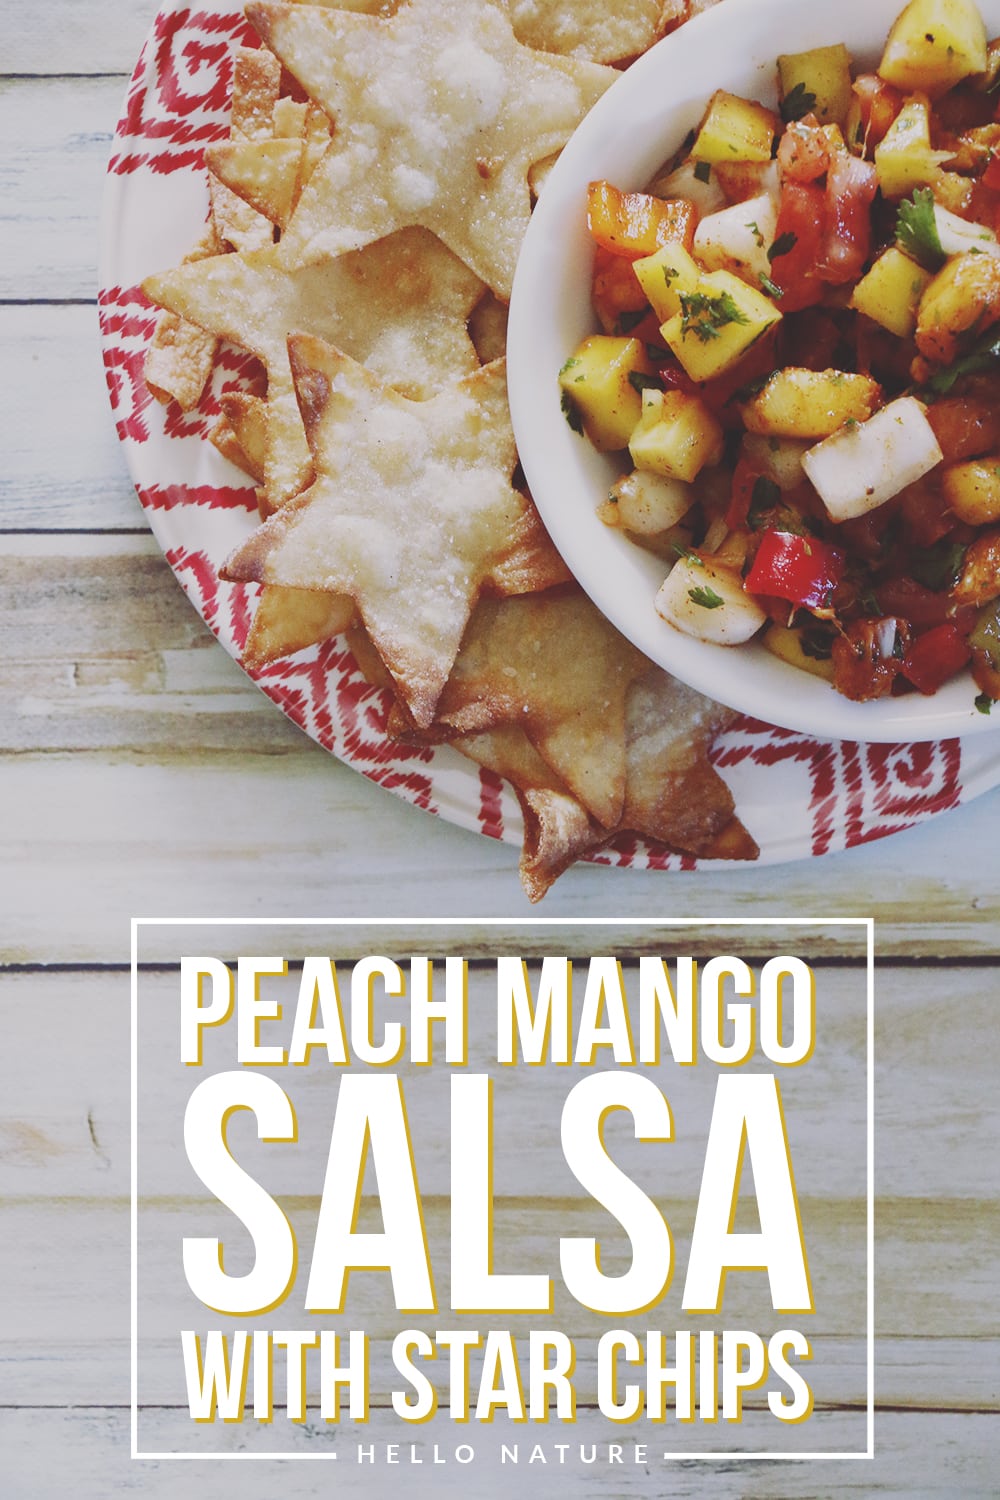 Freshen up your Summer meals with this fresh fruit peach mango salsa. It's sweet with just a hint of spice - perfect for your backyard parties!